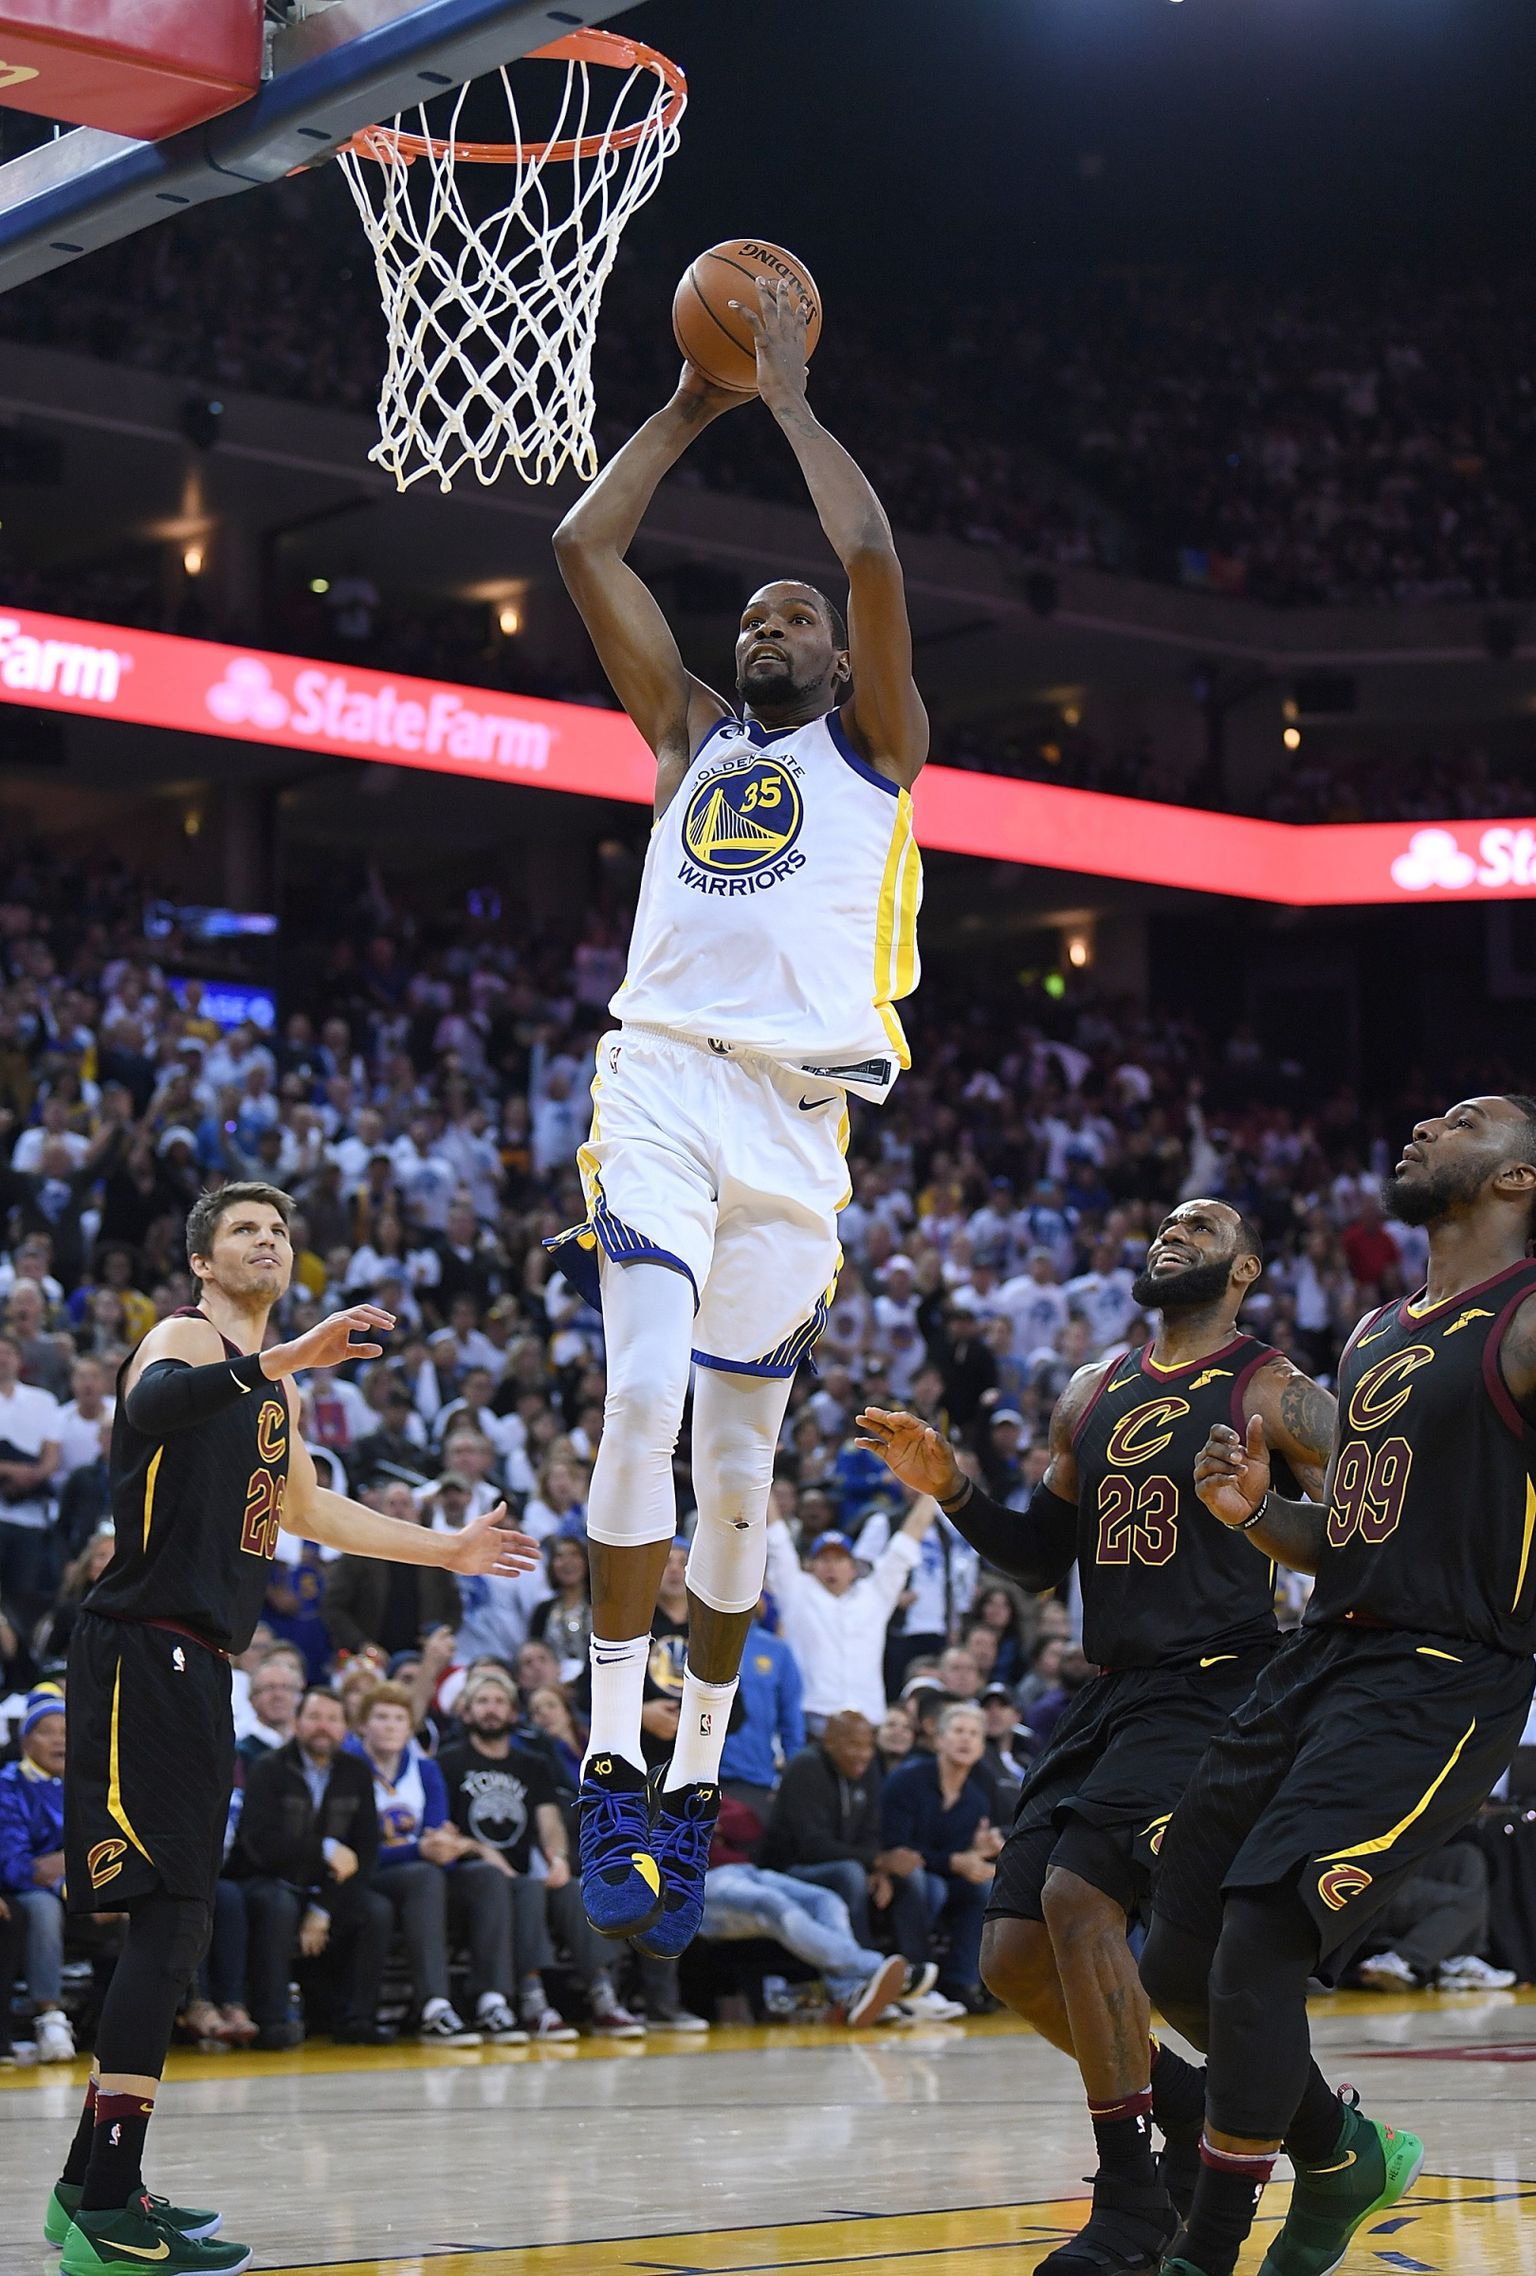 OAKLAND, CA - DECEMBER 25: Kevin Durant #35 of the Golden State Warriors goes up for a slam dunk against the Cleveland Cavaliers during an NBA basketball game at ORACLE Arena on December 25, 2017 in Oakland, California. NOTE TO USER: User expressly acknowledges and agrees that, by downloading and or using this photograph, User is consenting to the terms and conditions of the Getty Images License Agreement.   Thearon W. Henderson/Getty Images/AFP
== FOR NEWSPAPERS, INTERNET, TELCOS & TELEVISION USE ONLY ==